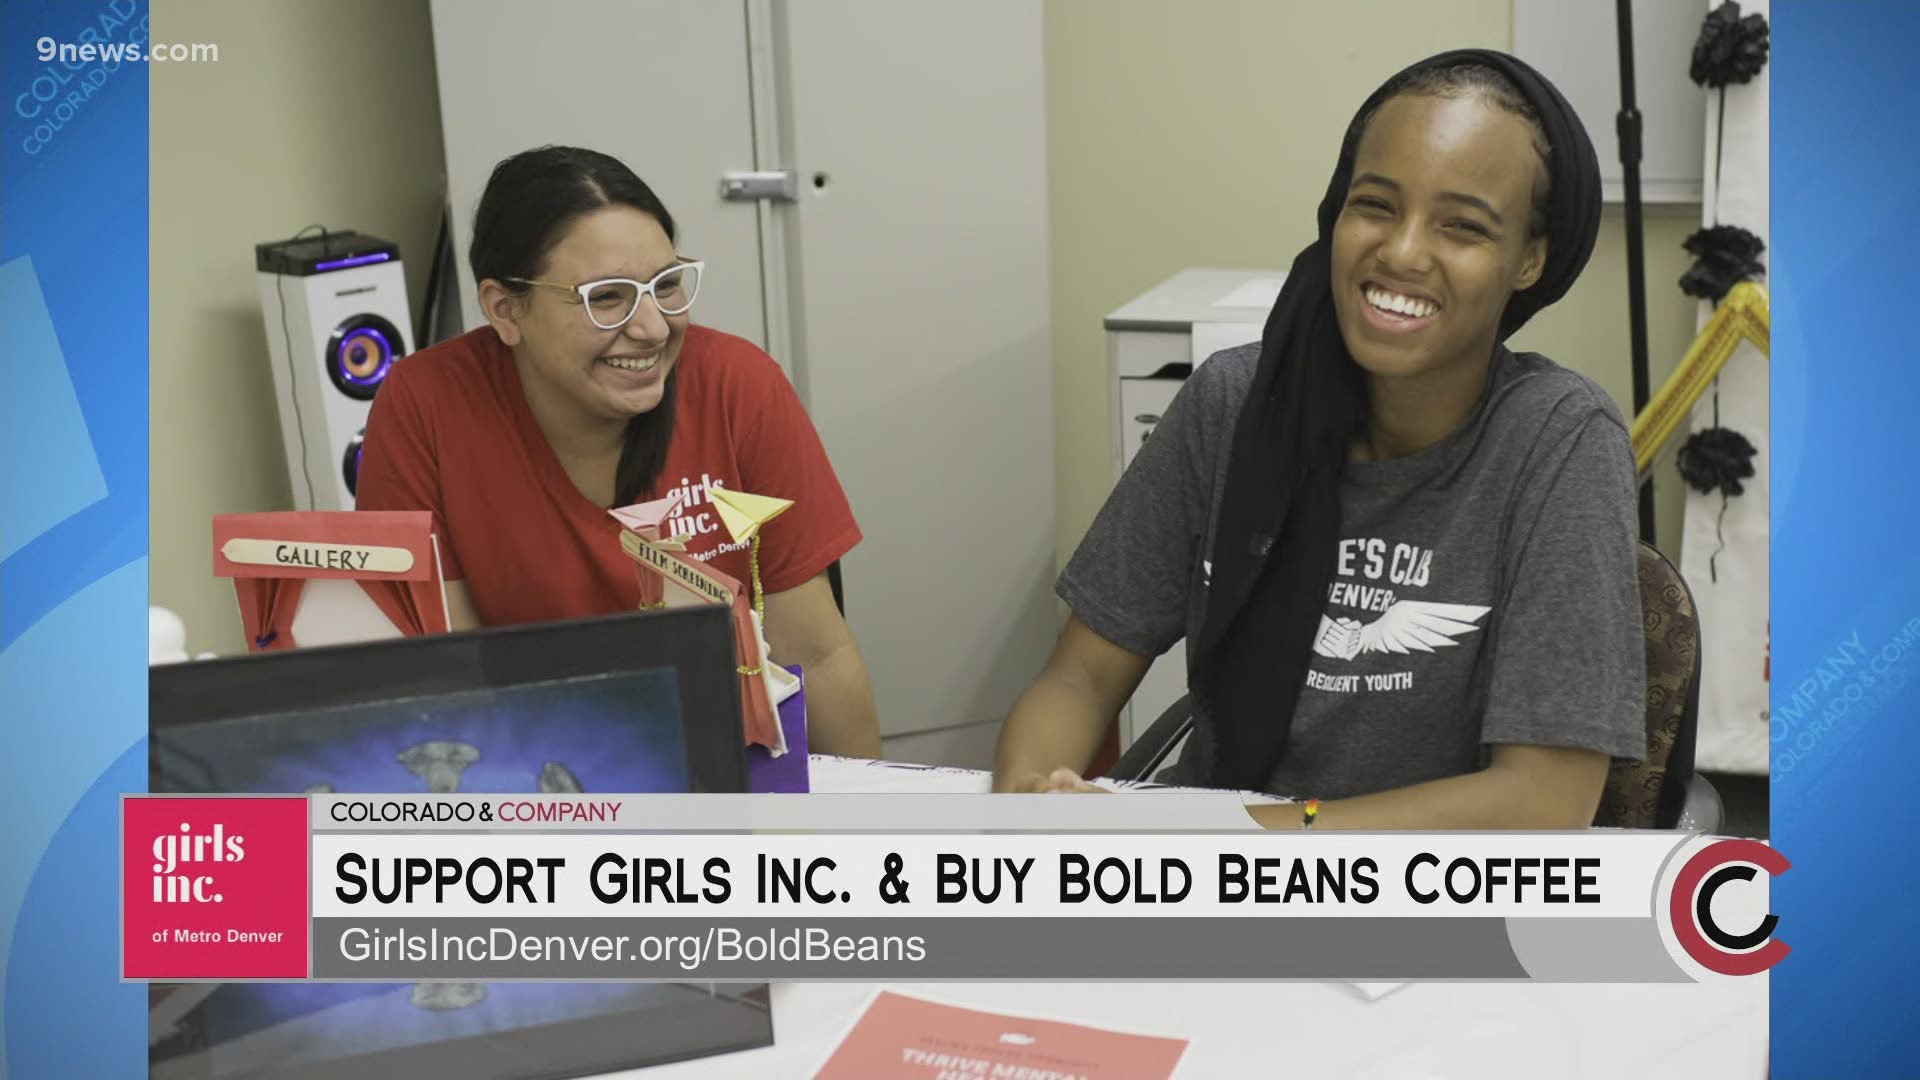 Support Girls Inc. of Metro Denver as they continue supporting the Women of the Future. Learn how to get involved and donate at GirlsIncDenver.org.